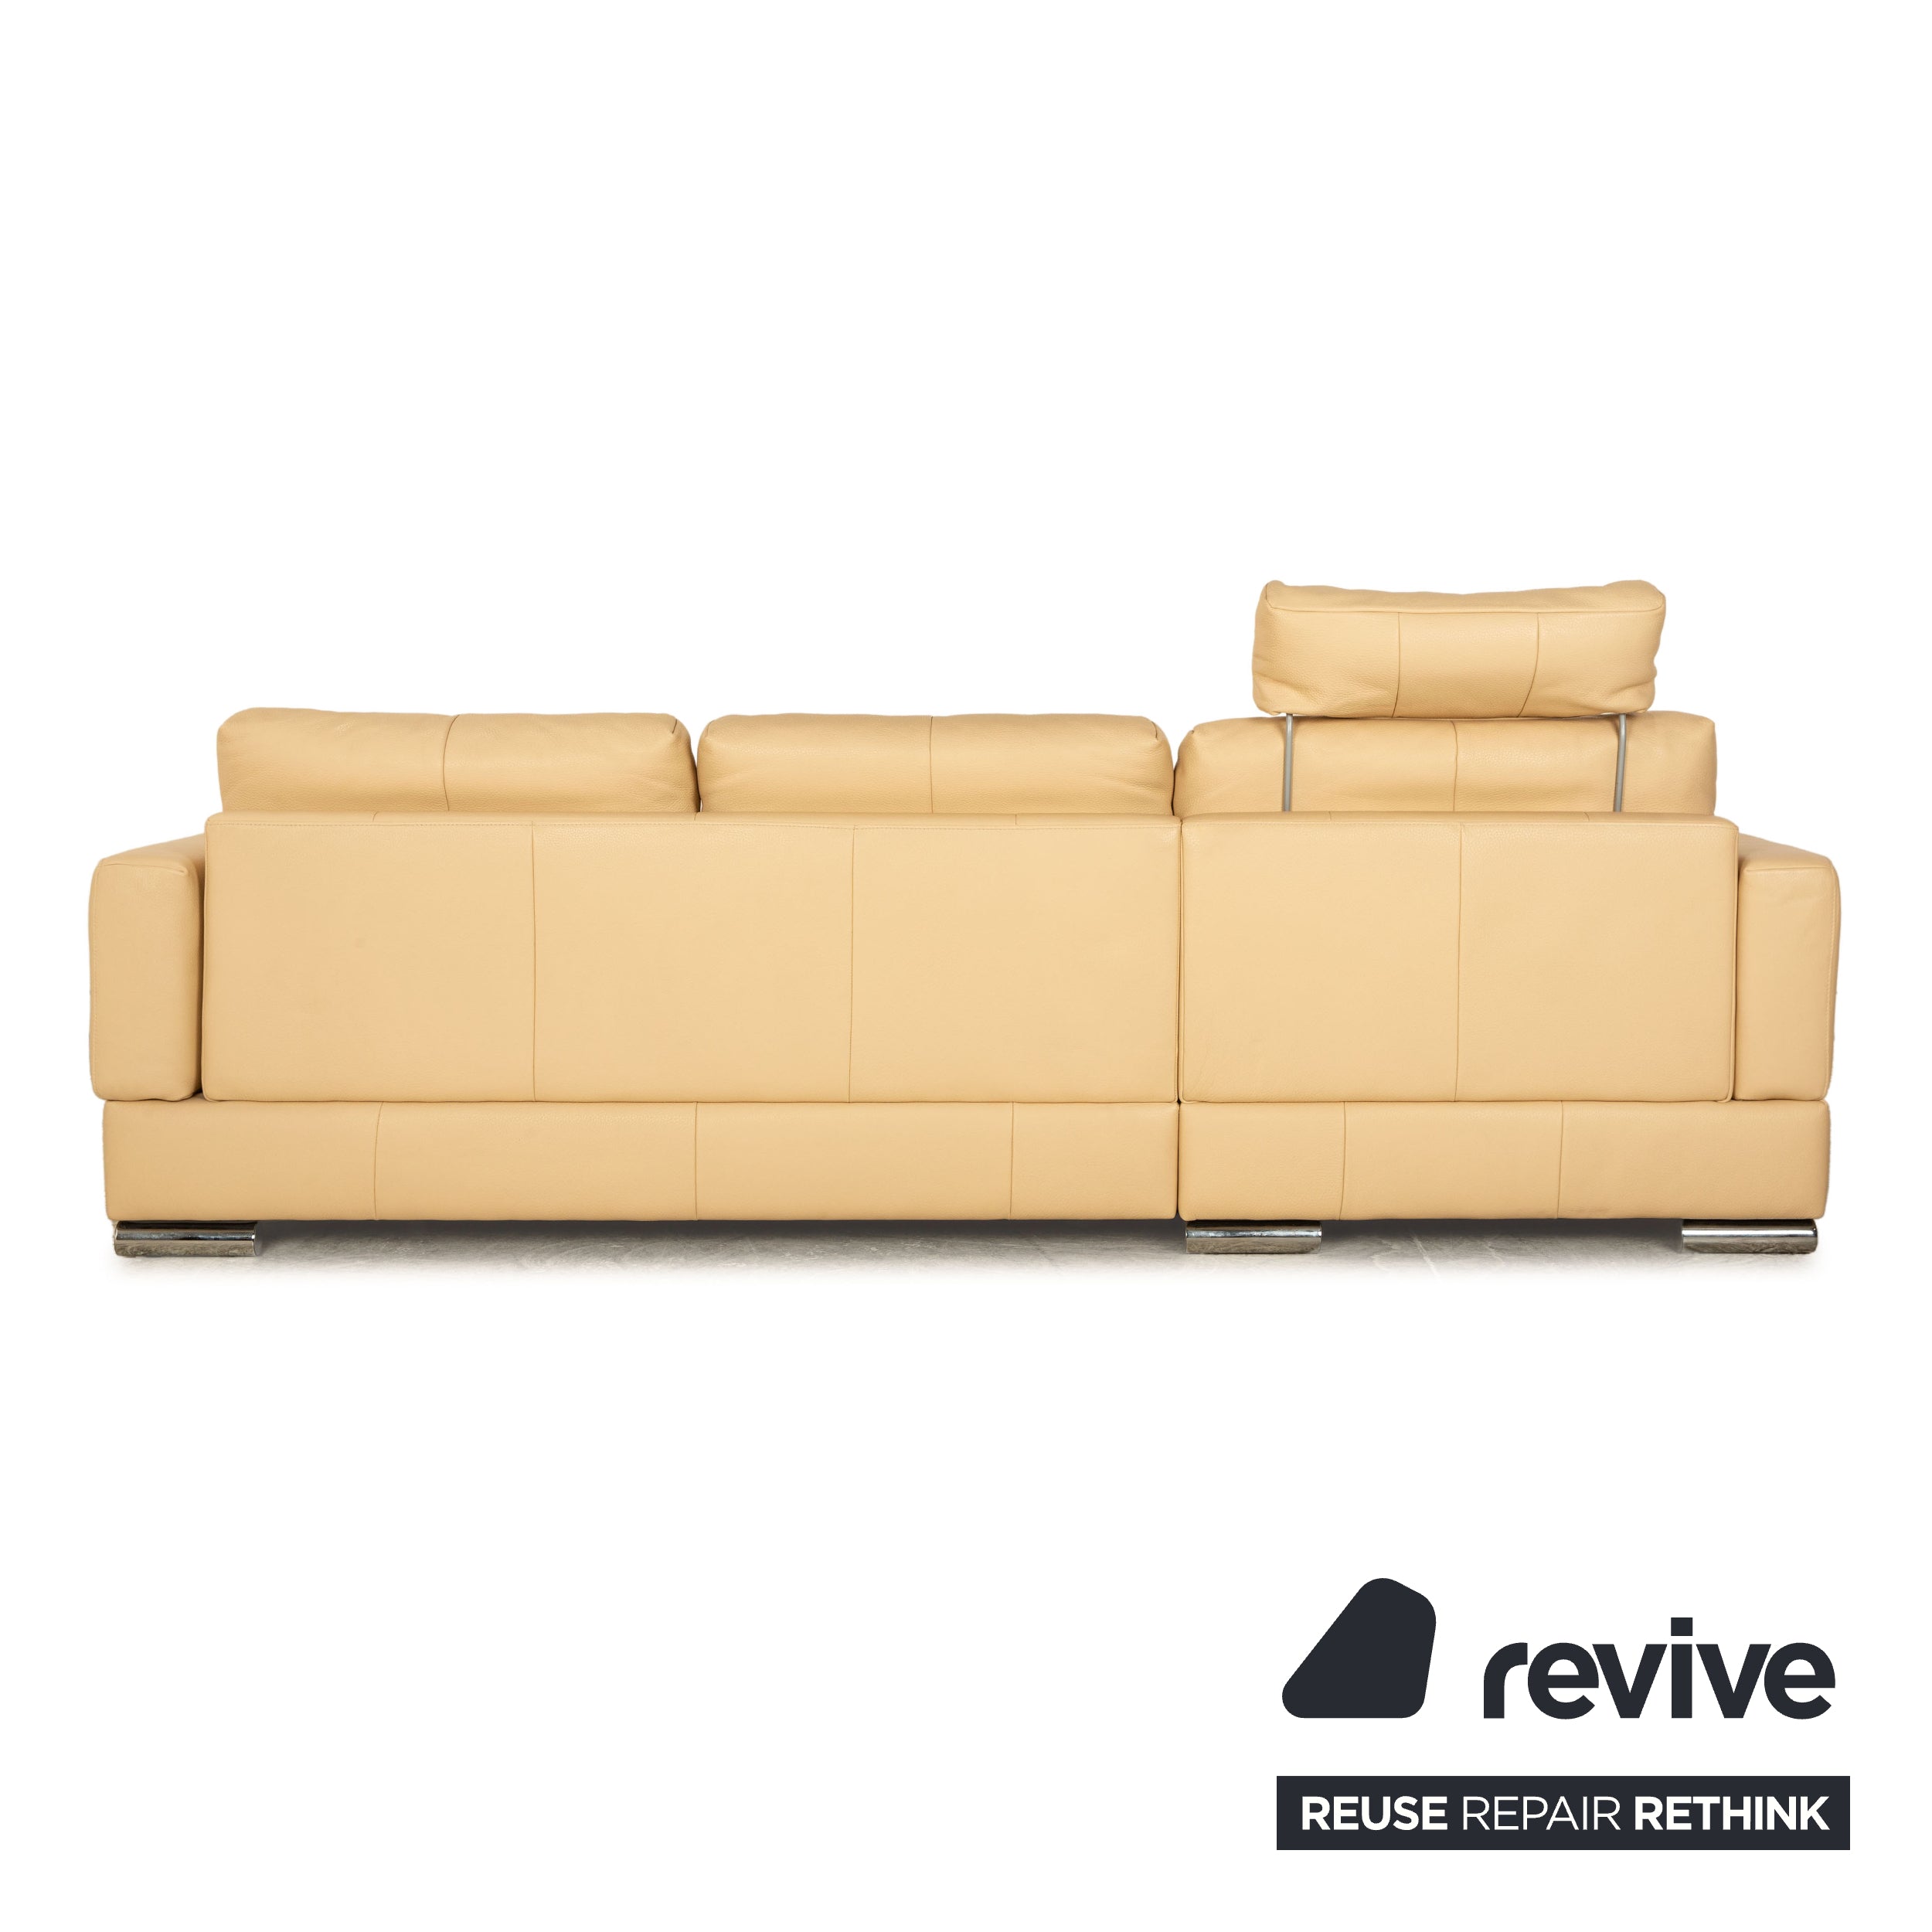 Laauser leather corner sofa cream beige manual function chaise longue left sofa couch